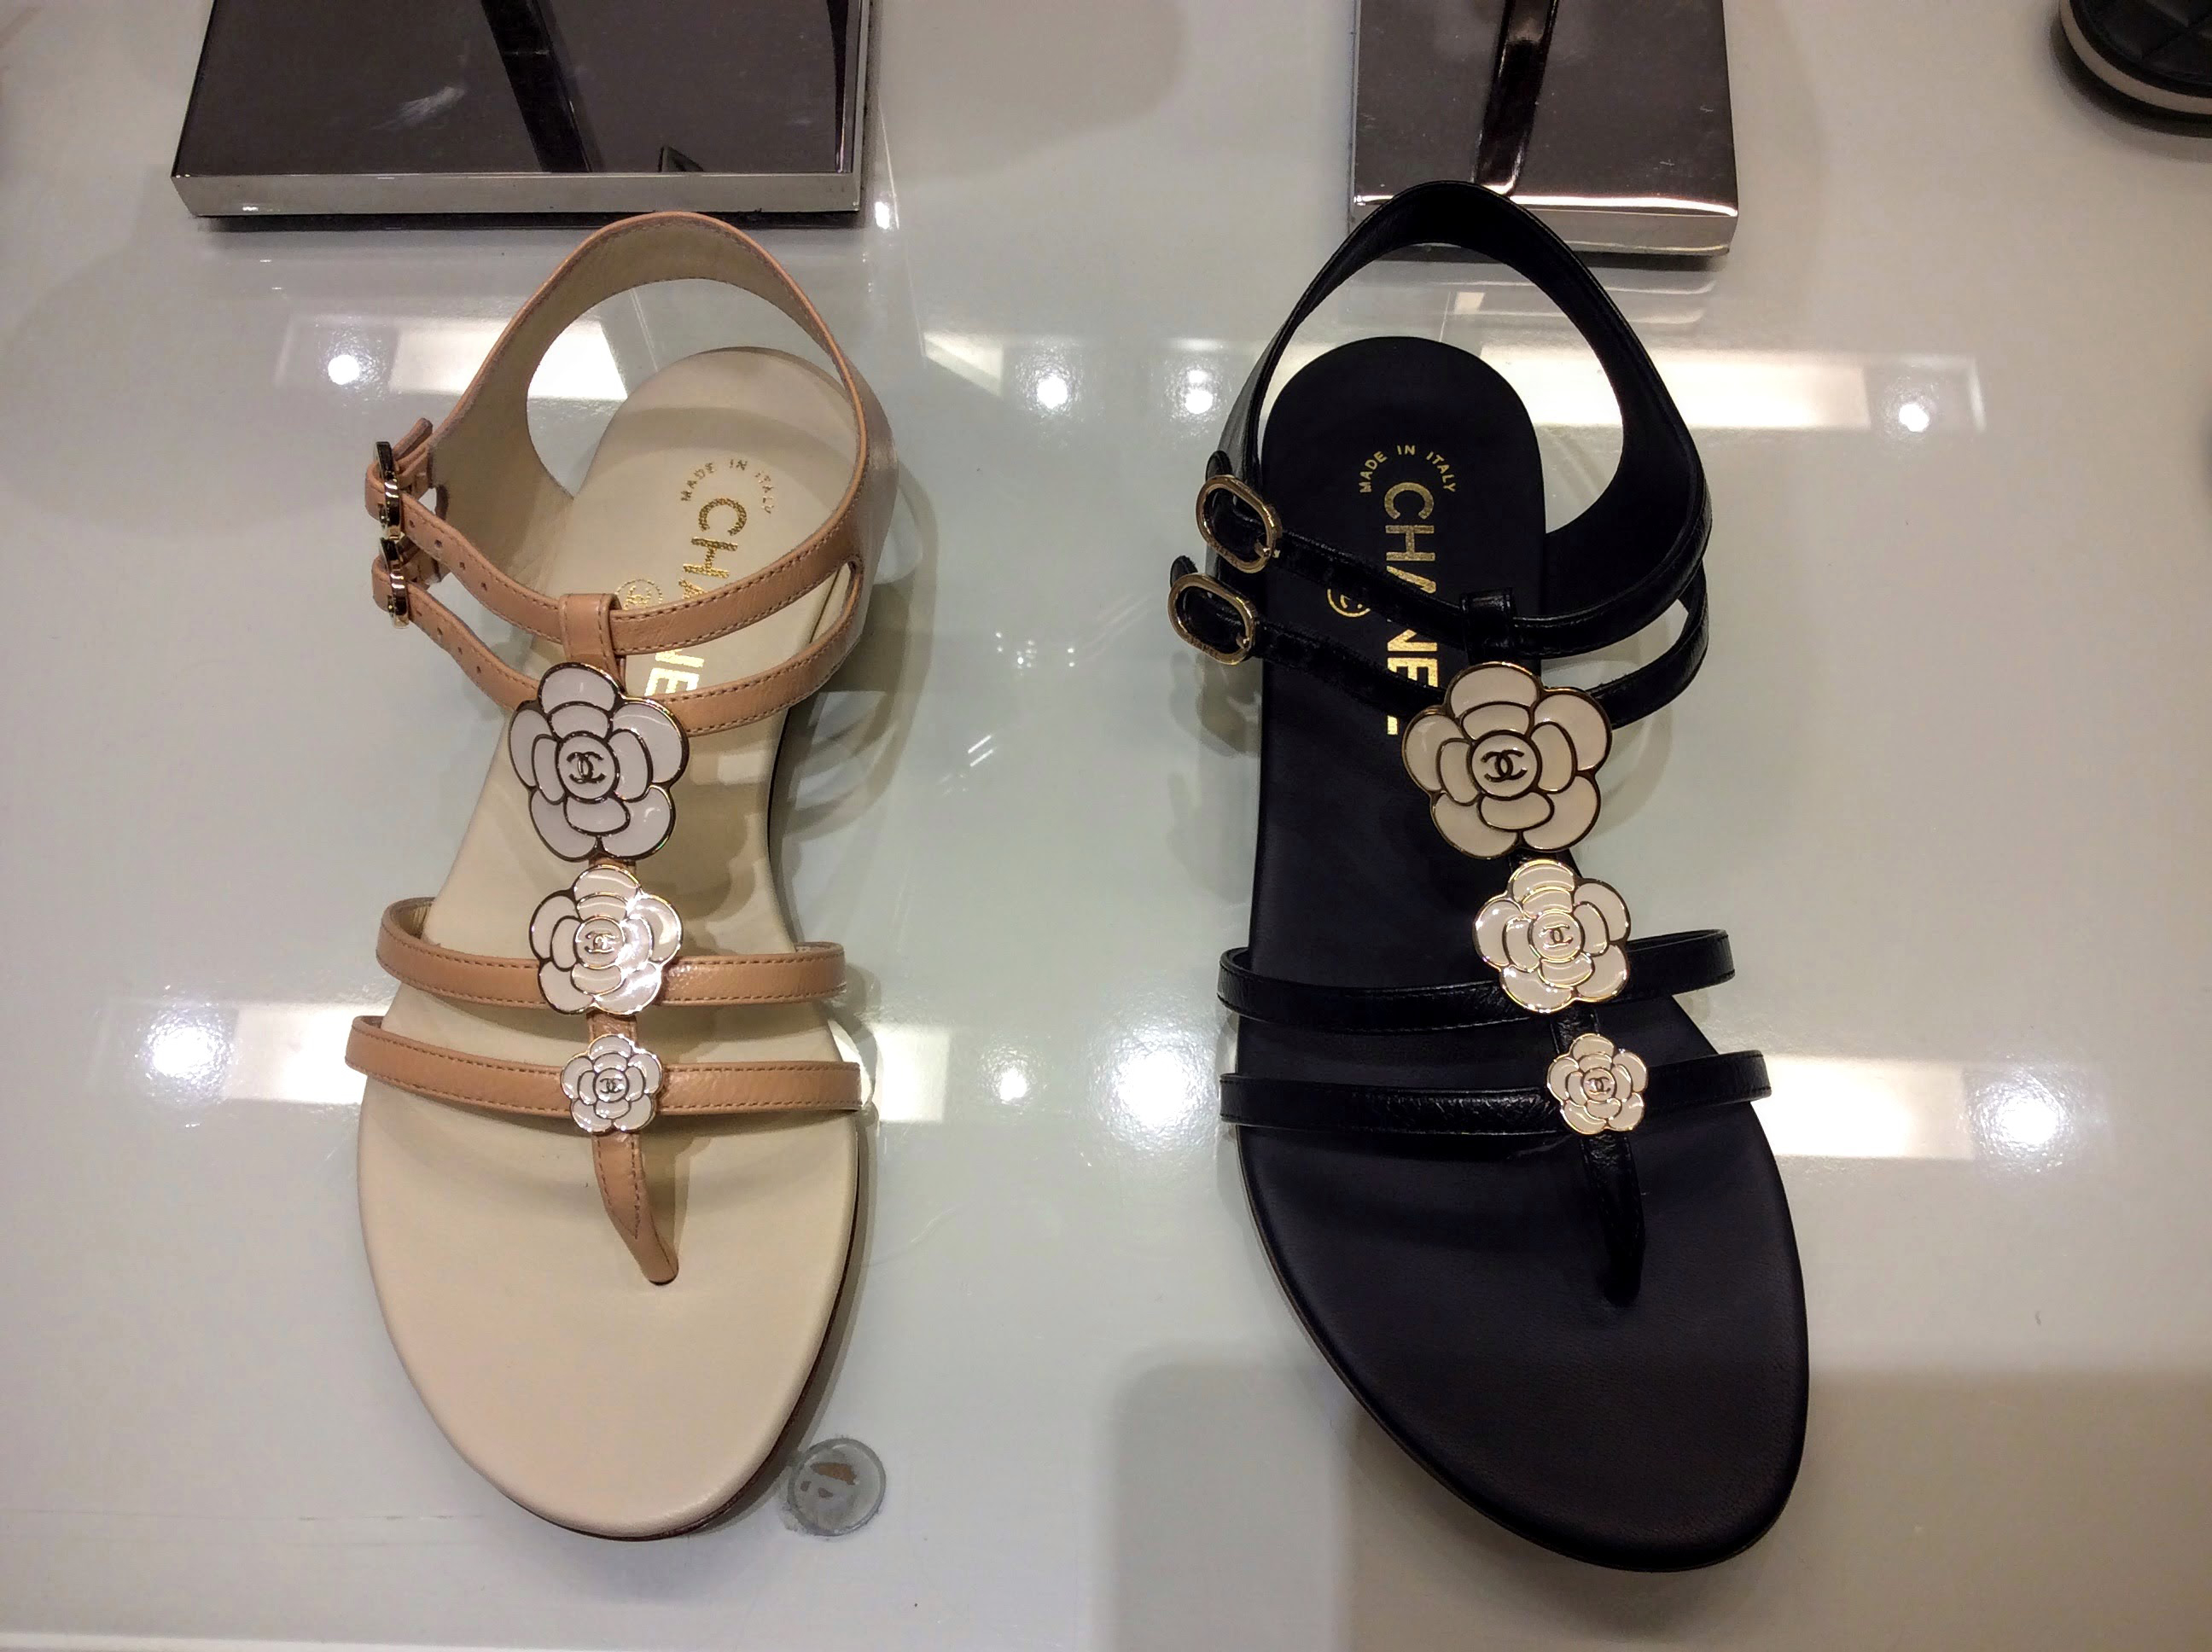 Chanel Shoes | In-Store Trends at Bloomingdale's - Fashion Trendsetter